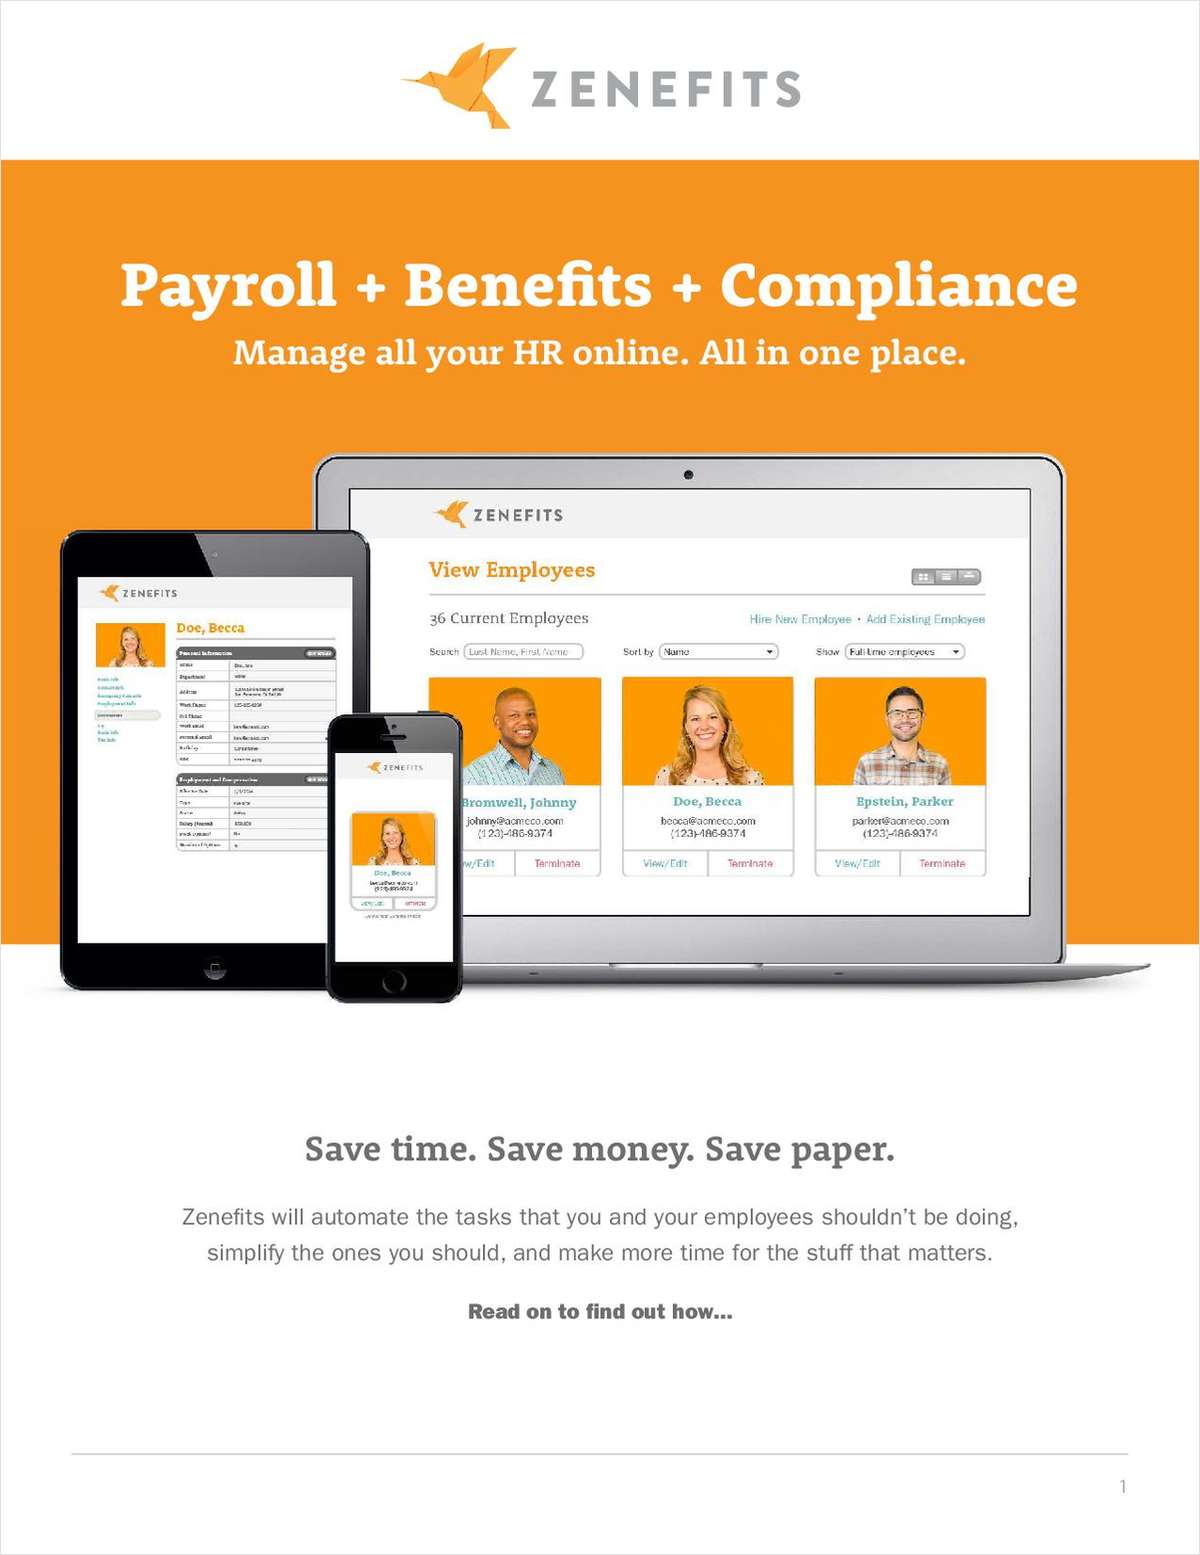 Do you want to manage employee health plans, payroll, PTO, 401k, and benefits, all in one place, without changing your current plans or systems?